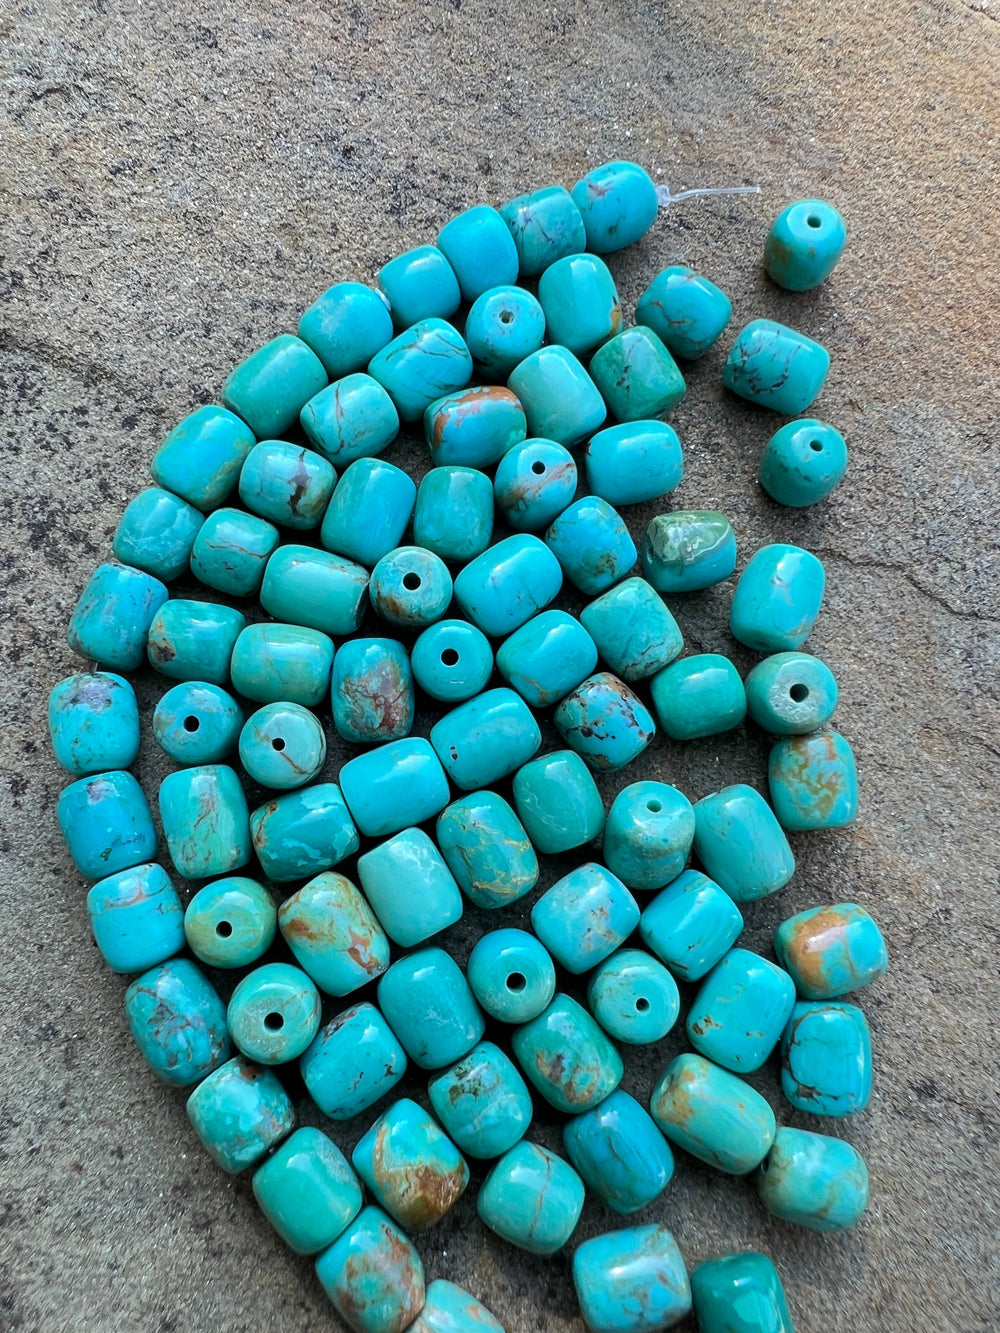 Chilean Turquoise (Chile) 7x8mm Barrel Beads Package of 5